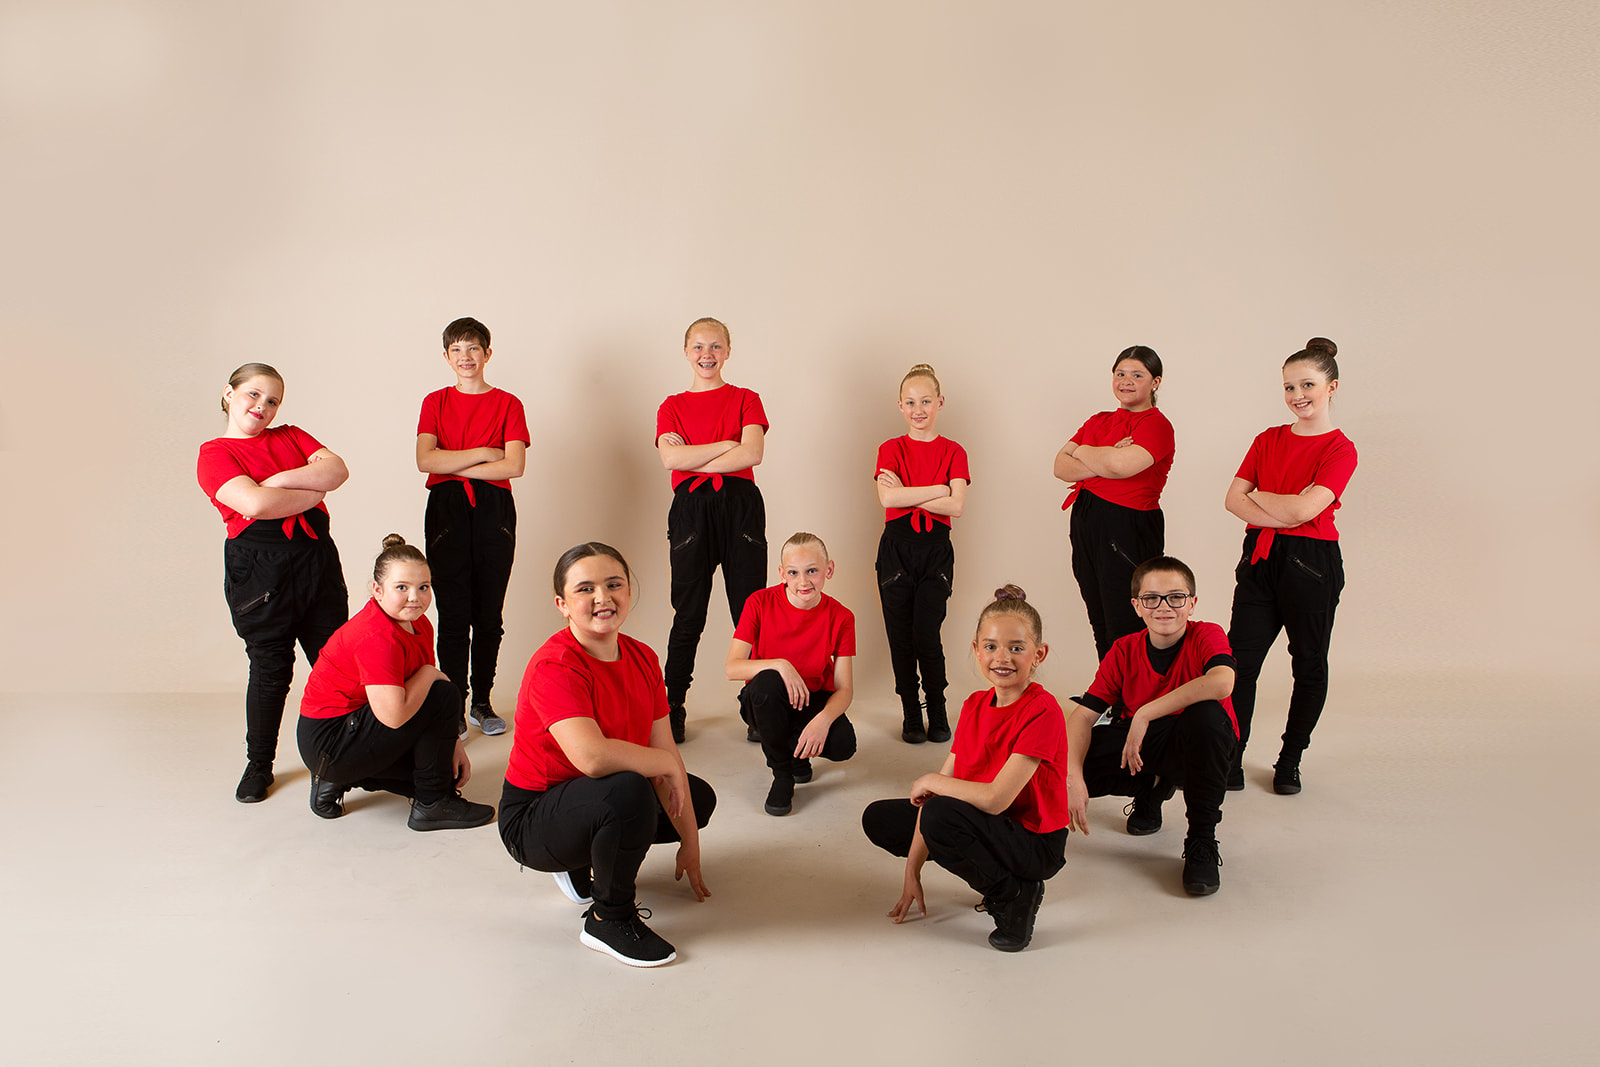 HipHop dance classes at Canyon Dance Academy in Caldwell, Idaho